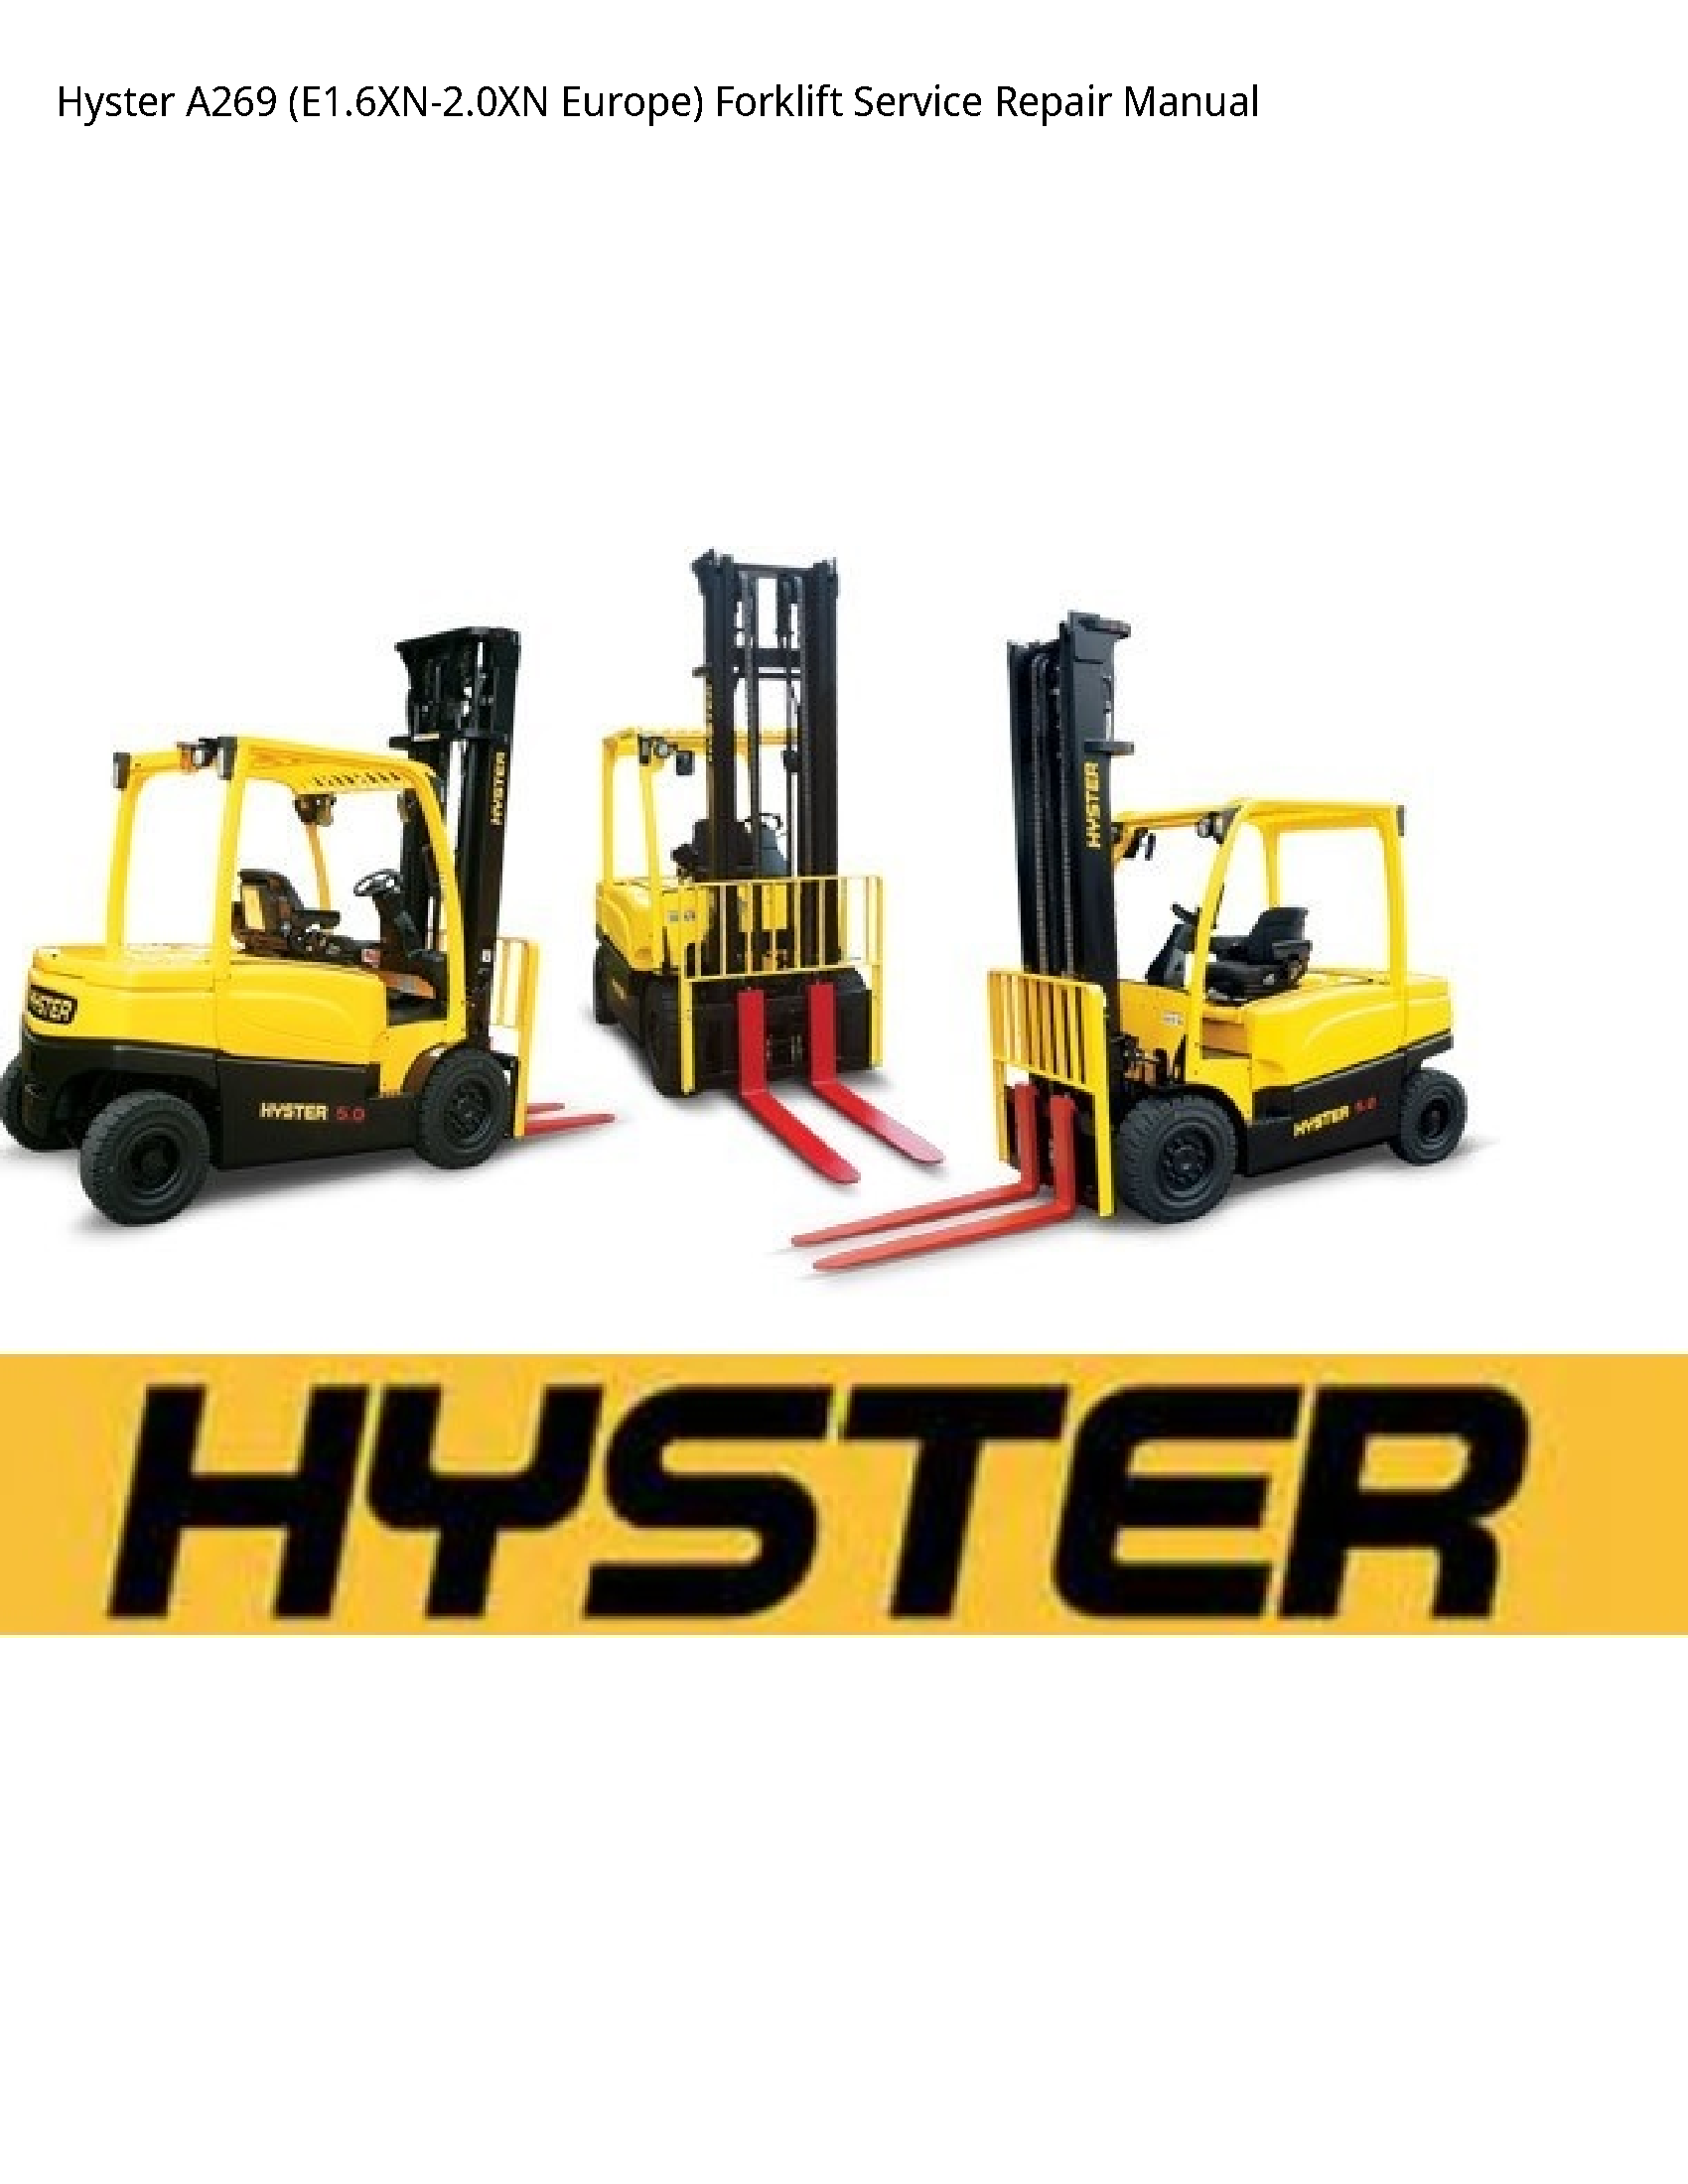 Hyster A269 Europe) Forklift manual